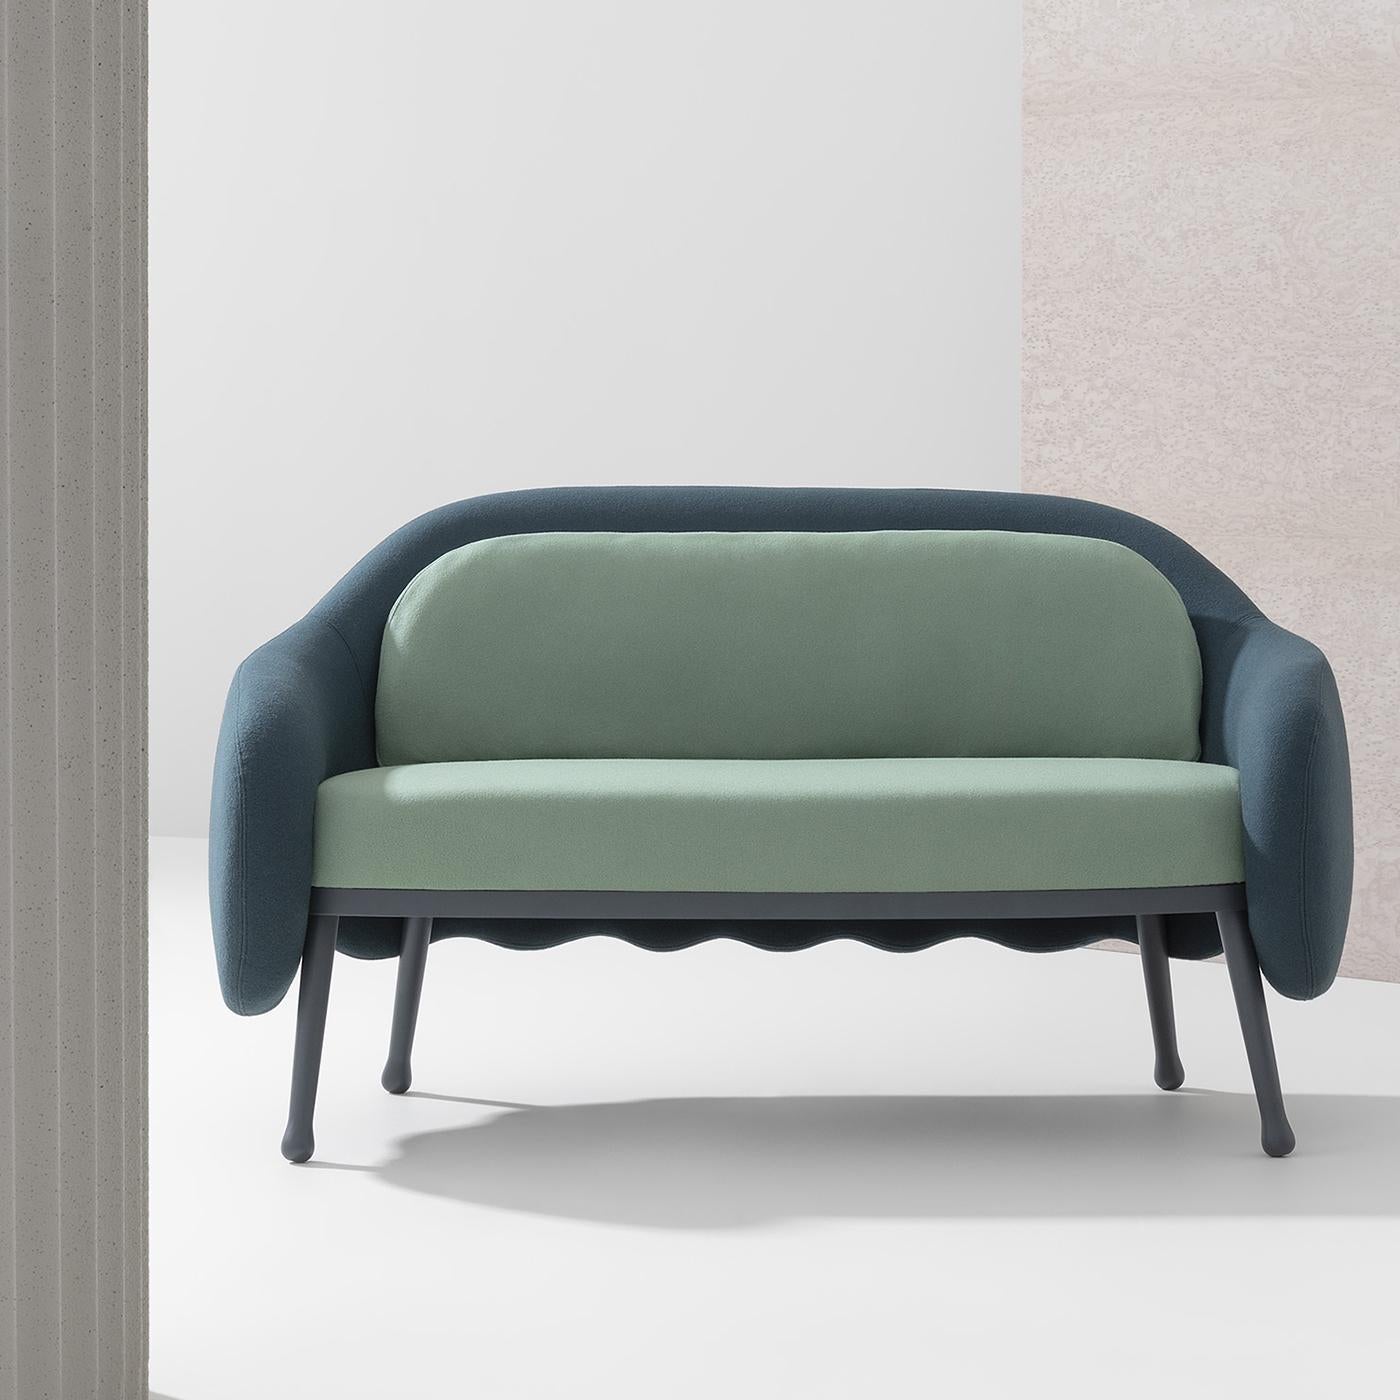 Contemporary flair and refined, durable materials merge in this exquisite sofa by Cristina Celestino. Resting on gray-lacquered beechwood legs with round feet and small felt pads, the padded seat and back cushions are upholstered of a pastel green